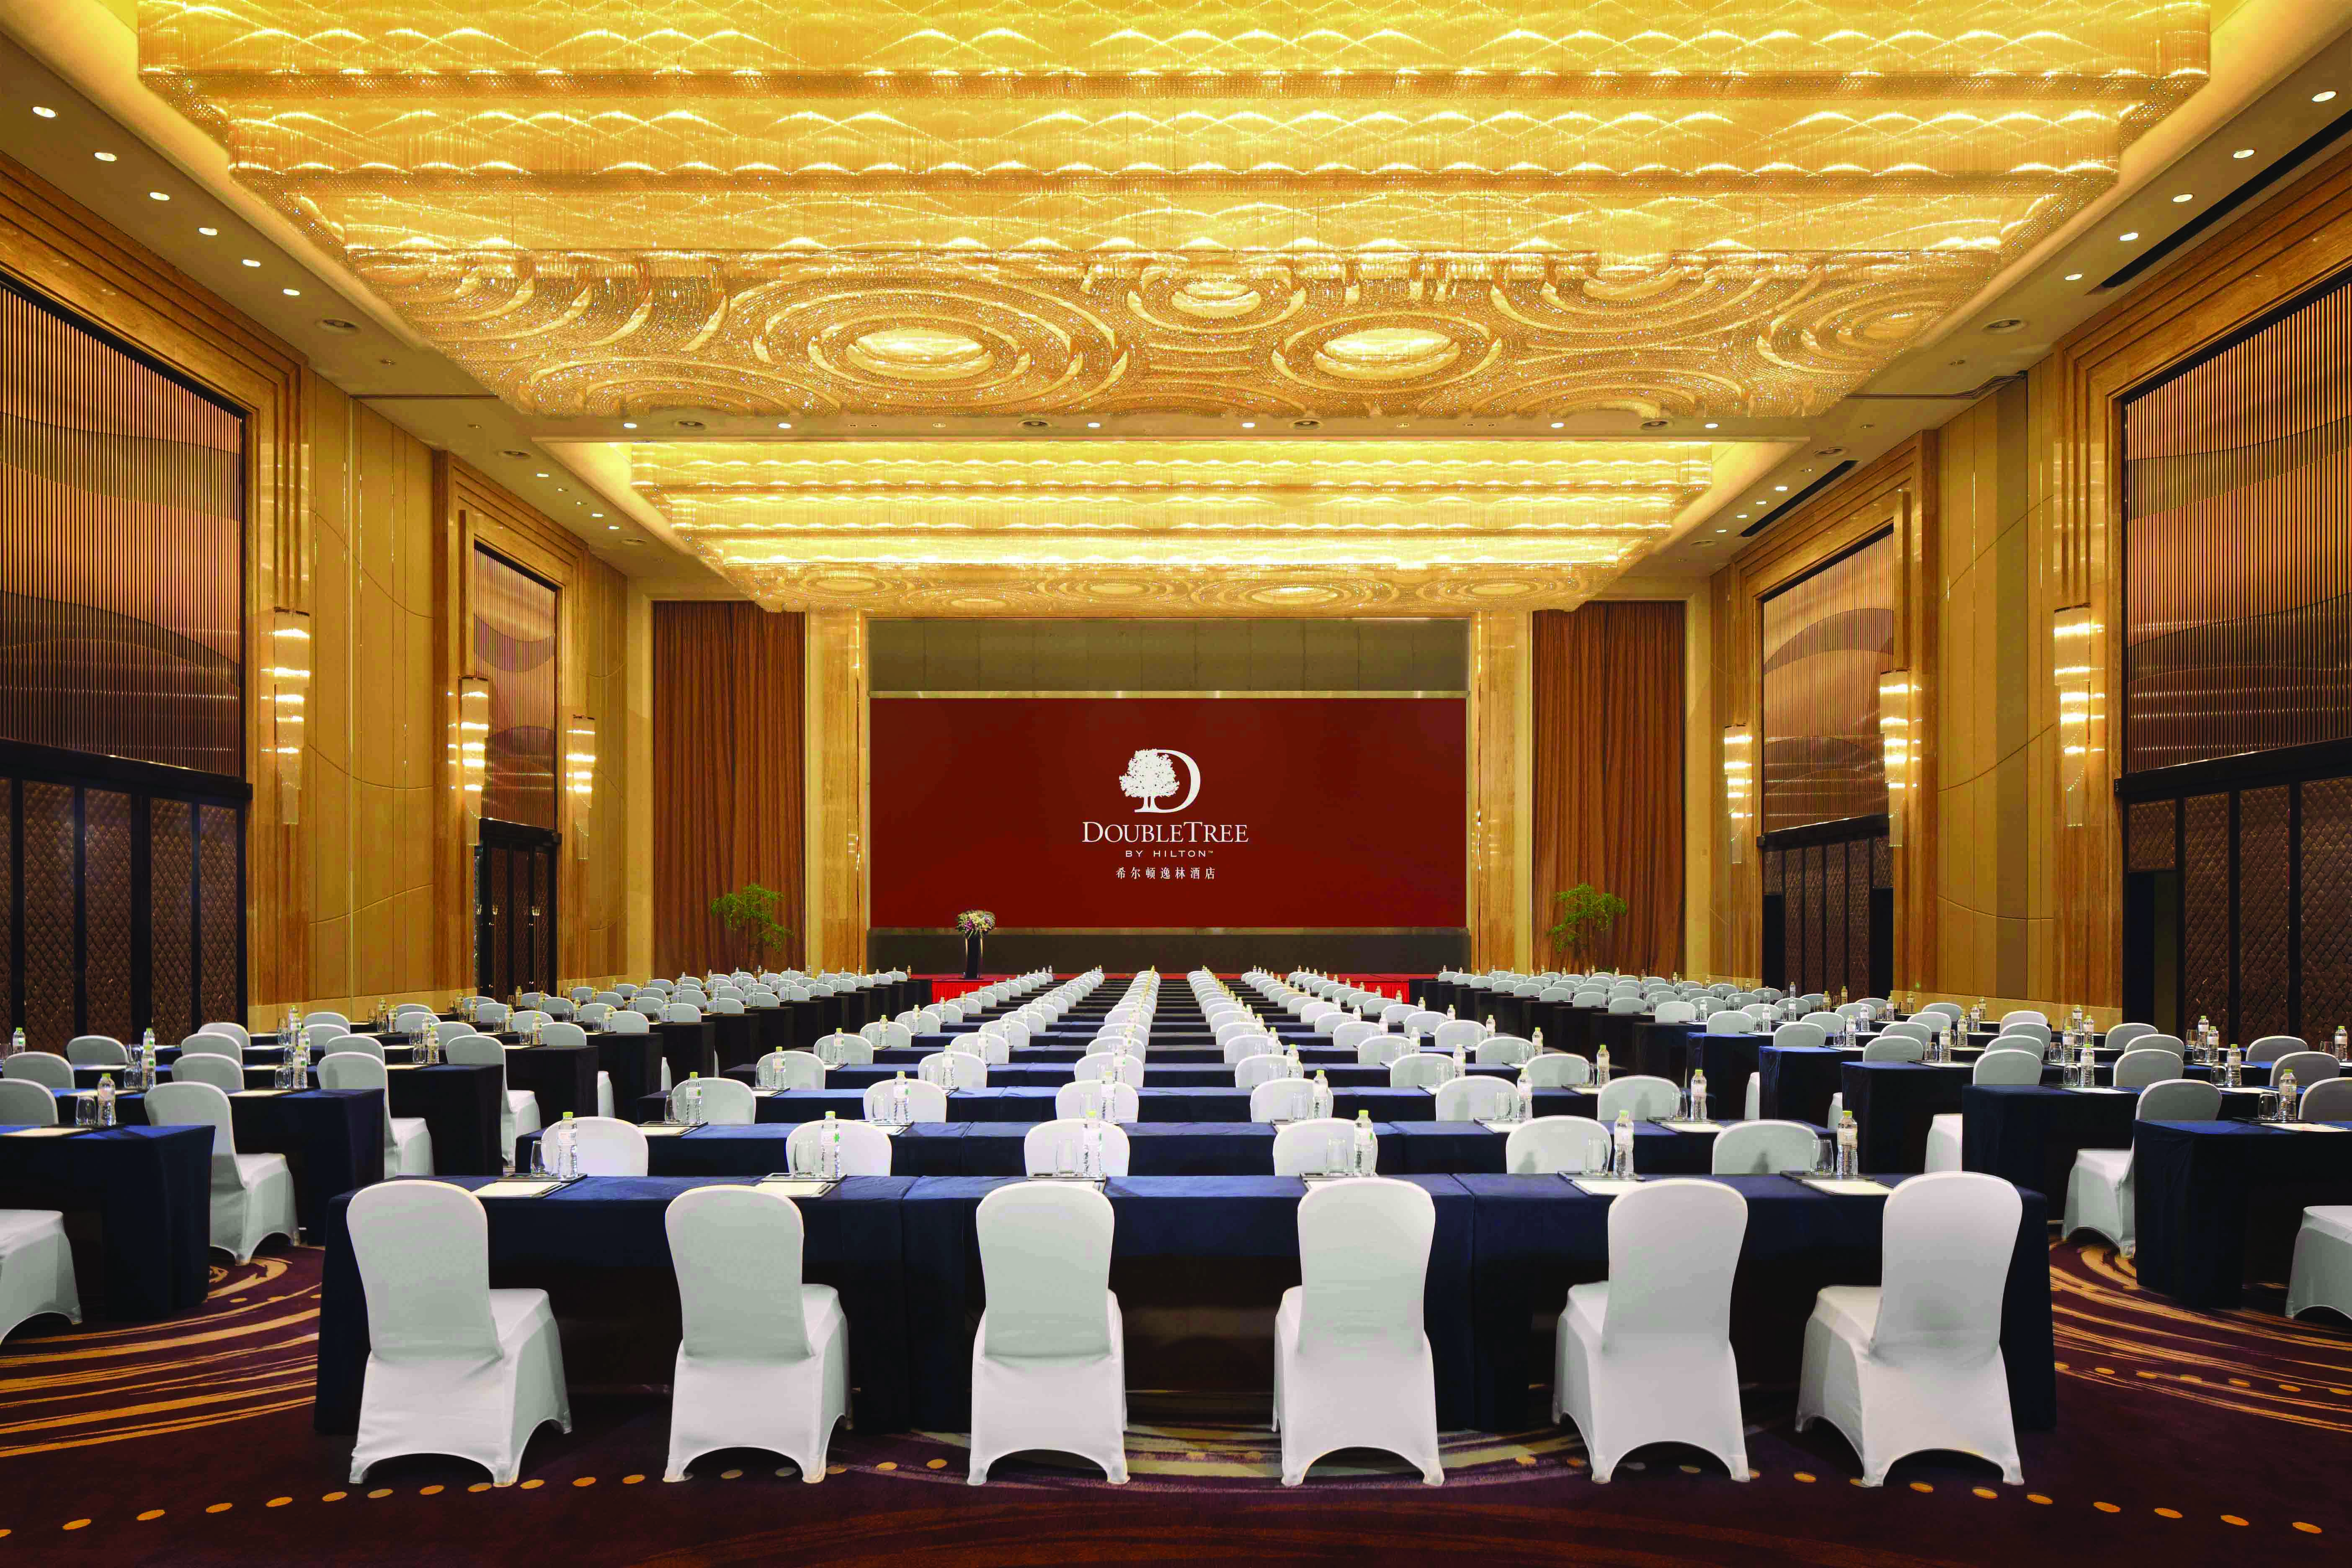 Banquet Hall with Tables and Chairs Facing Stage